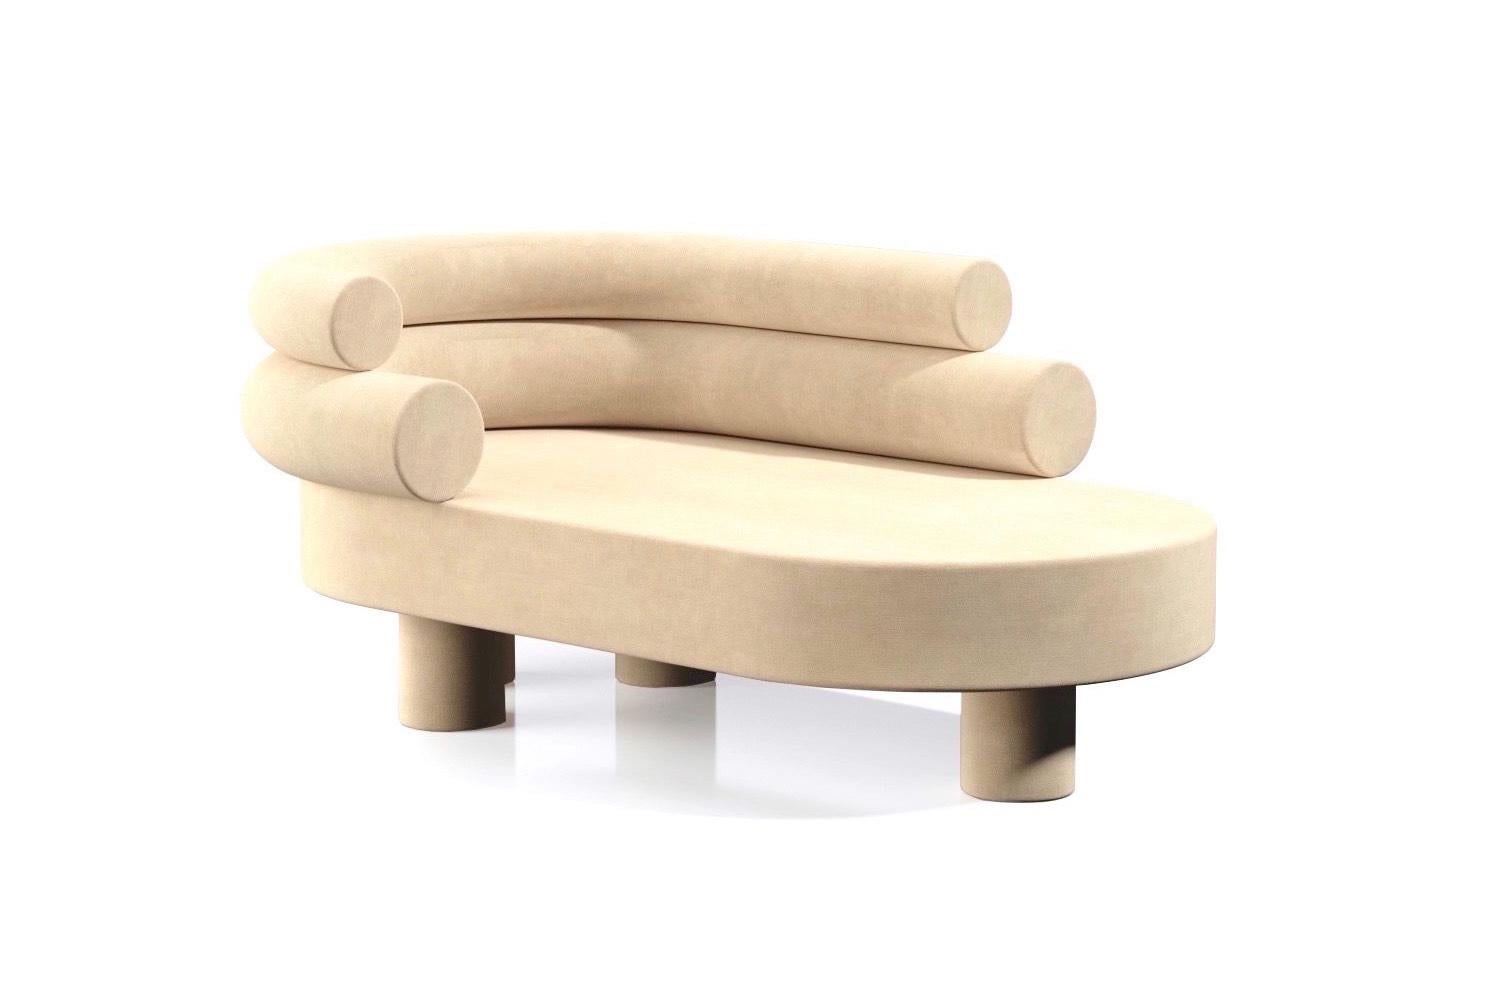 Beige Mineral chaise longue by Kasadamo
Dimensions: D 185 x W 100 x H 78 cm
Materials: Suede
Also available: Customized materials and colors available.


Kasadamo is about uniqueness, visions and exclusivity, a brand that was designed to be